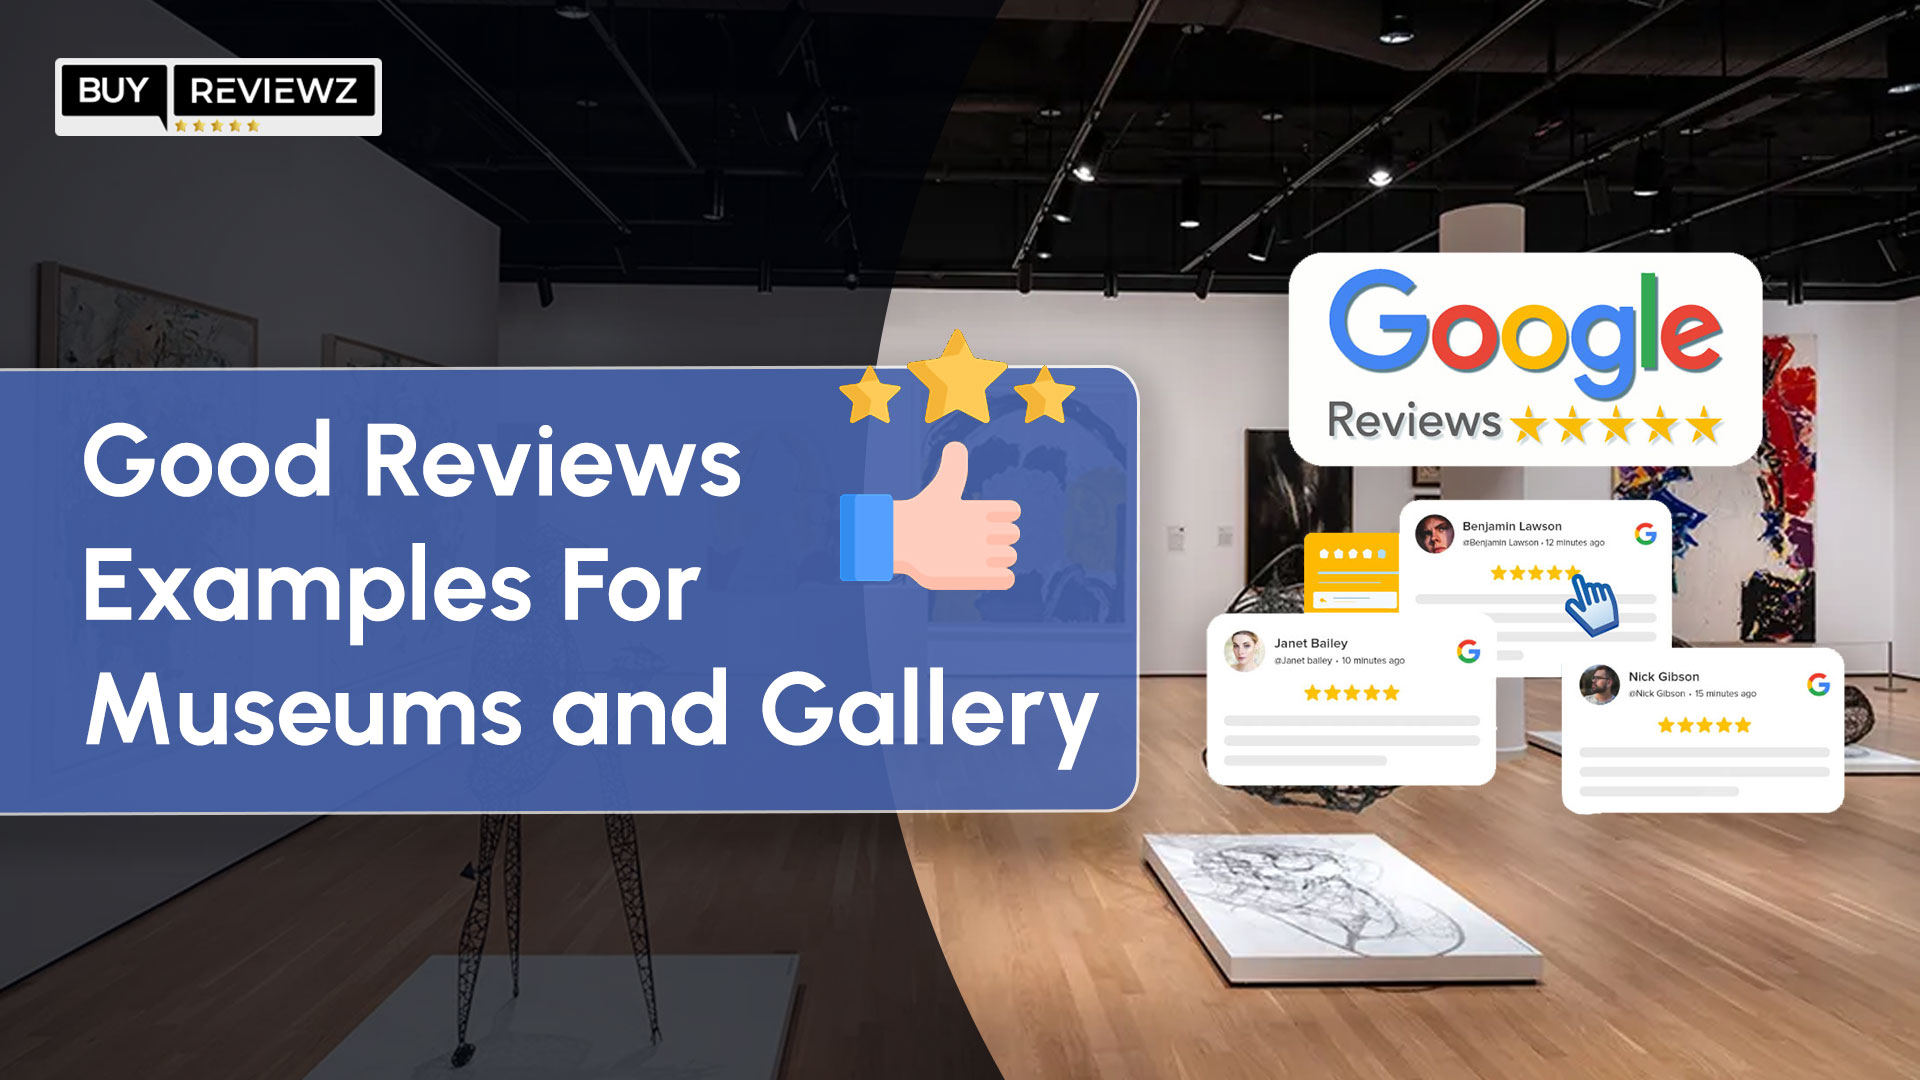 Good Reviews Examples For Museums and Gallery